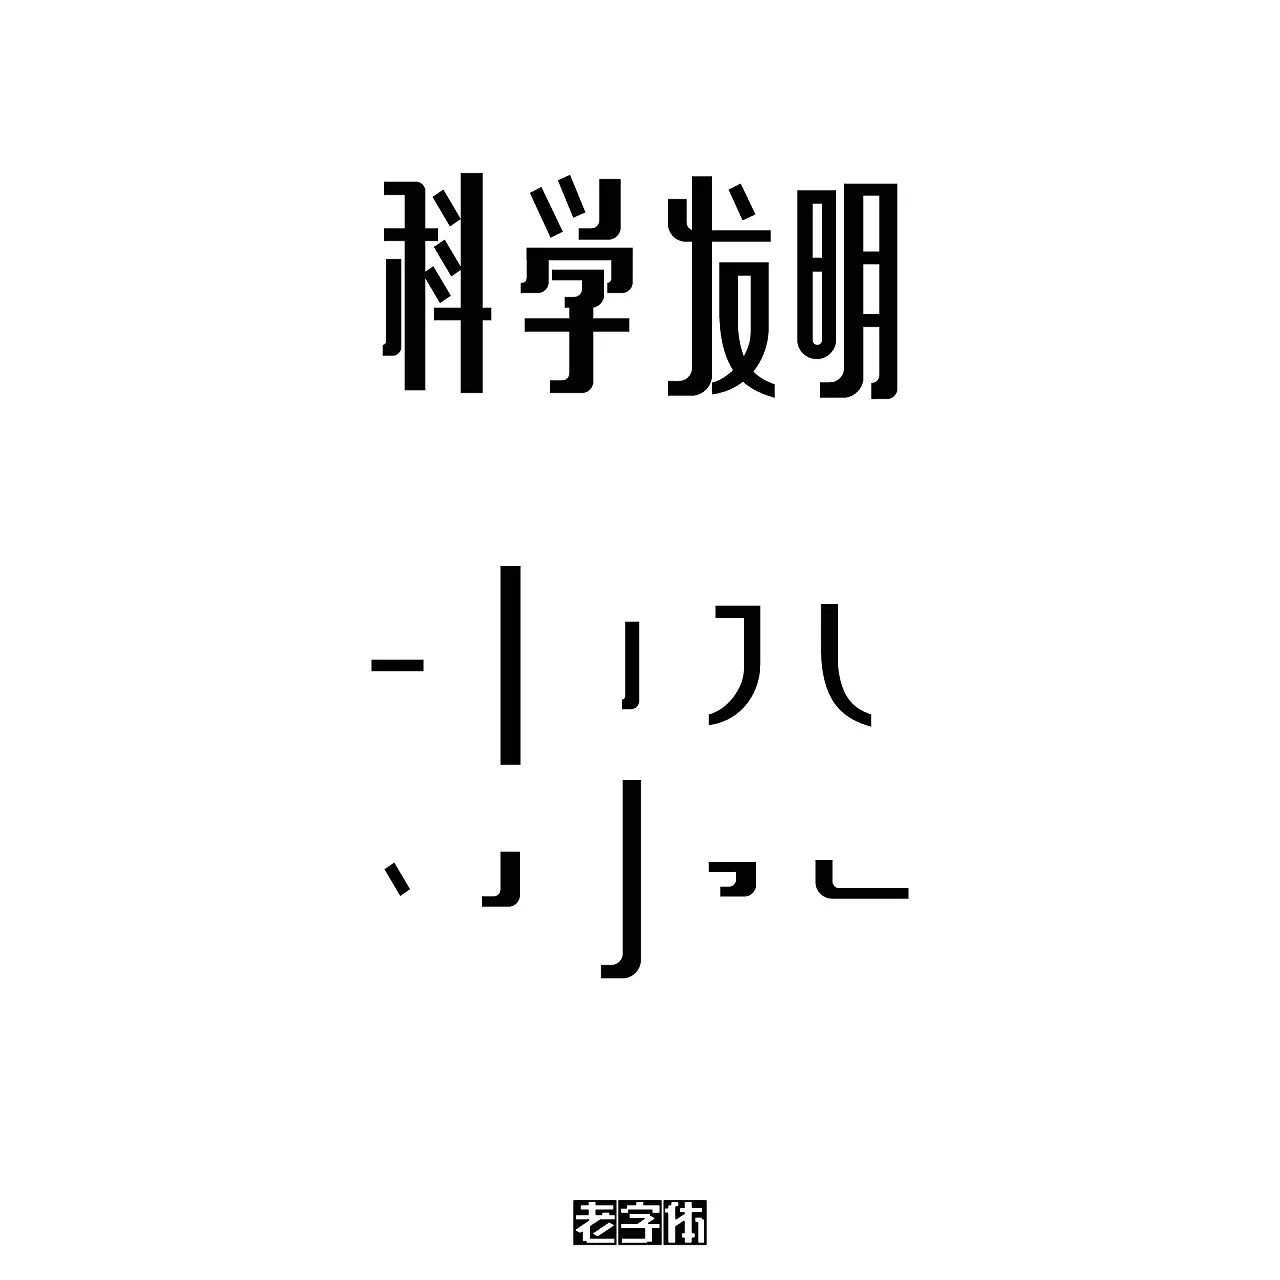 14P Chinese font tracing and decomposition